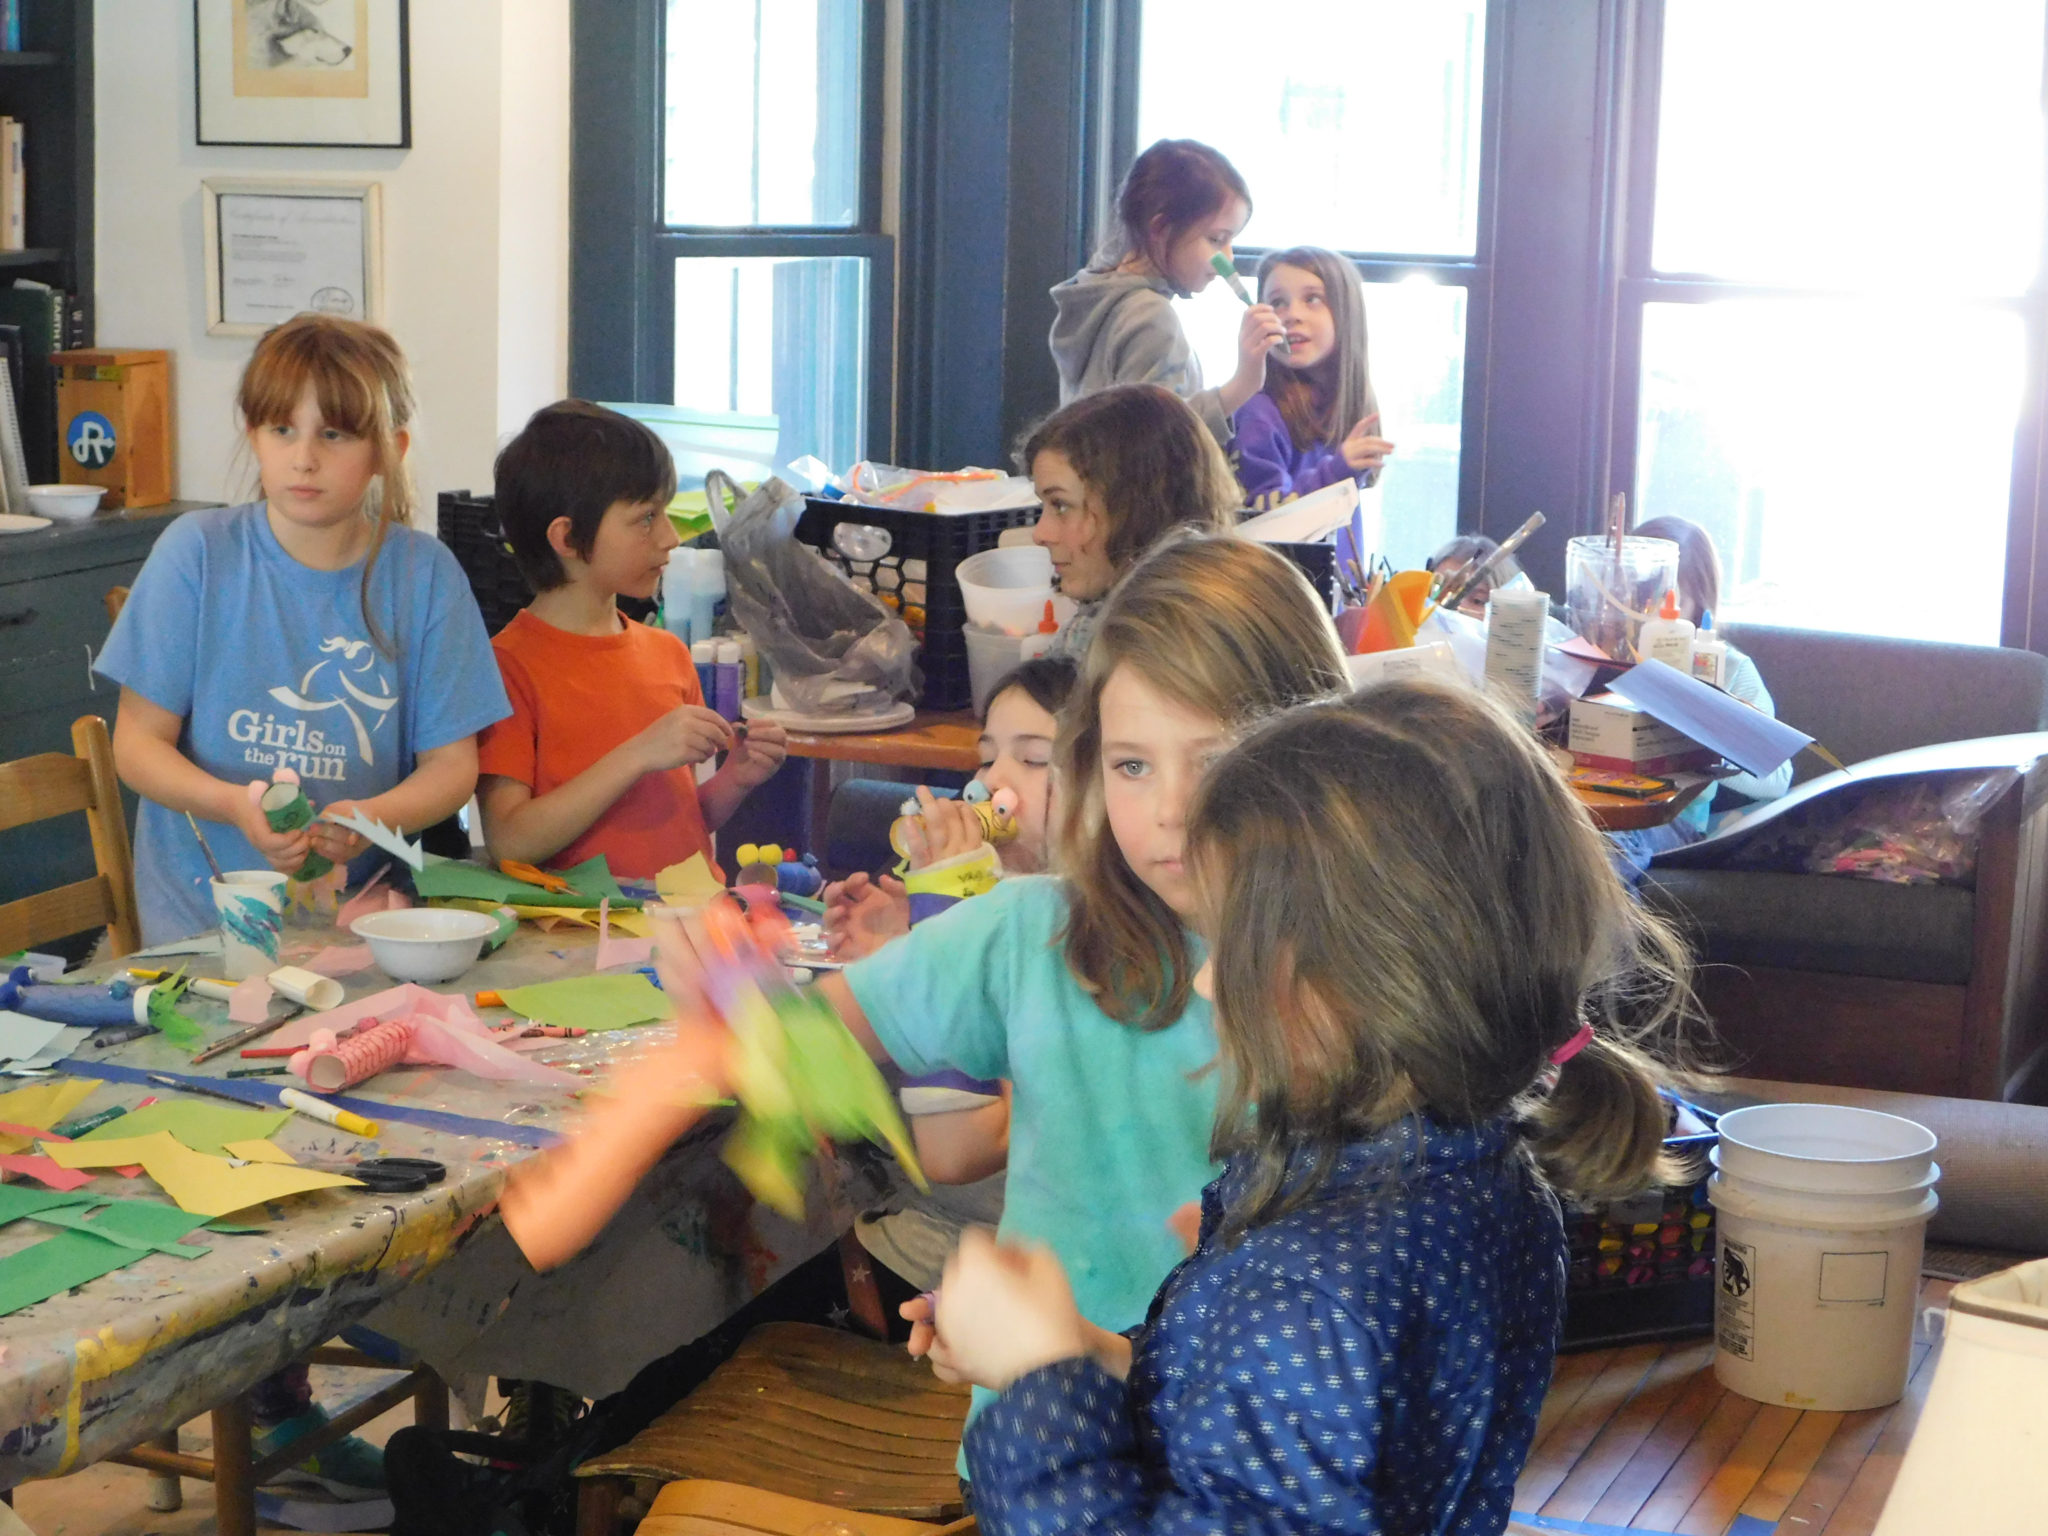 A group of children working on crafts in the Hulbert living room.